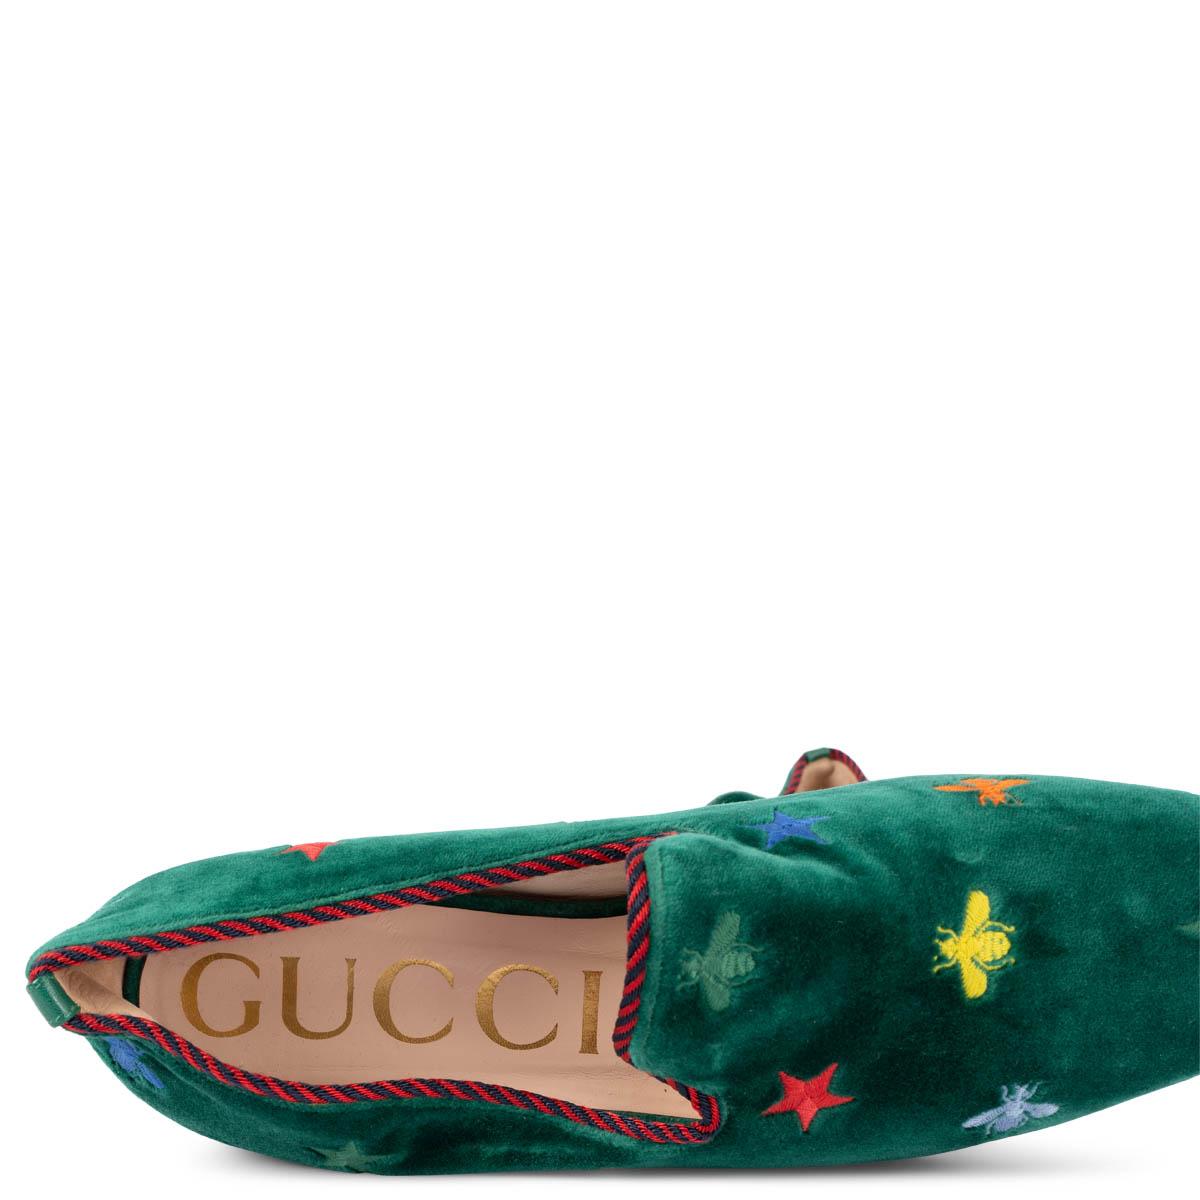 GUCCI green velvet KIBI EMBROIDERED Loafers Shoes 38 2